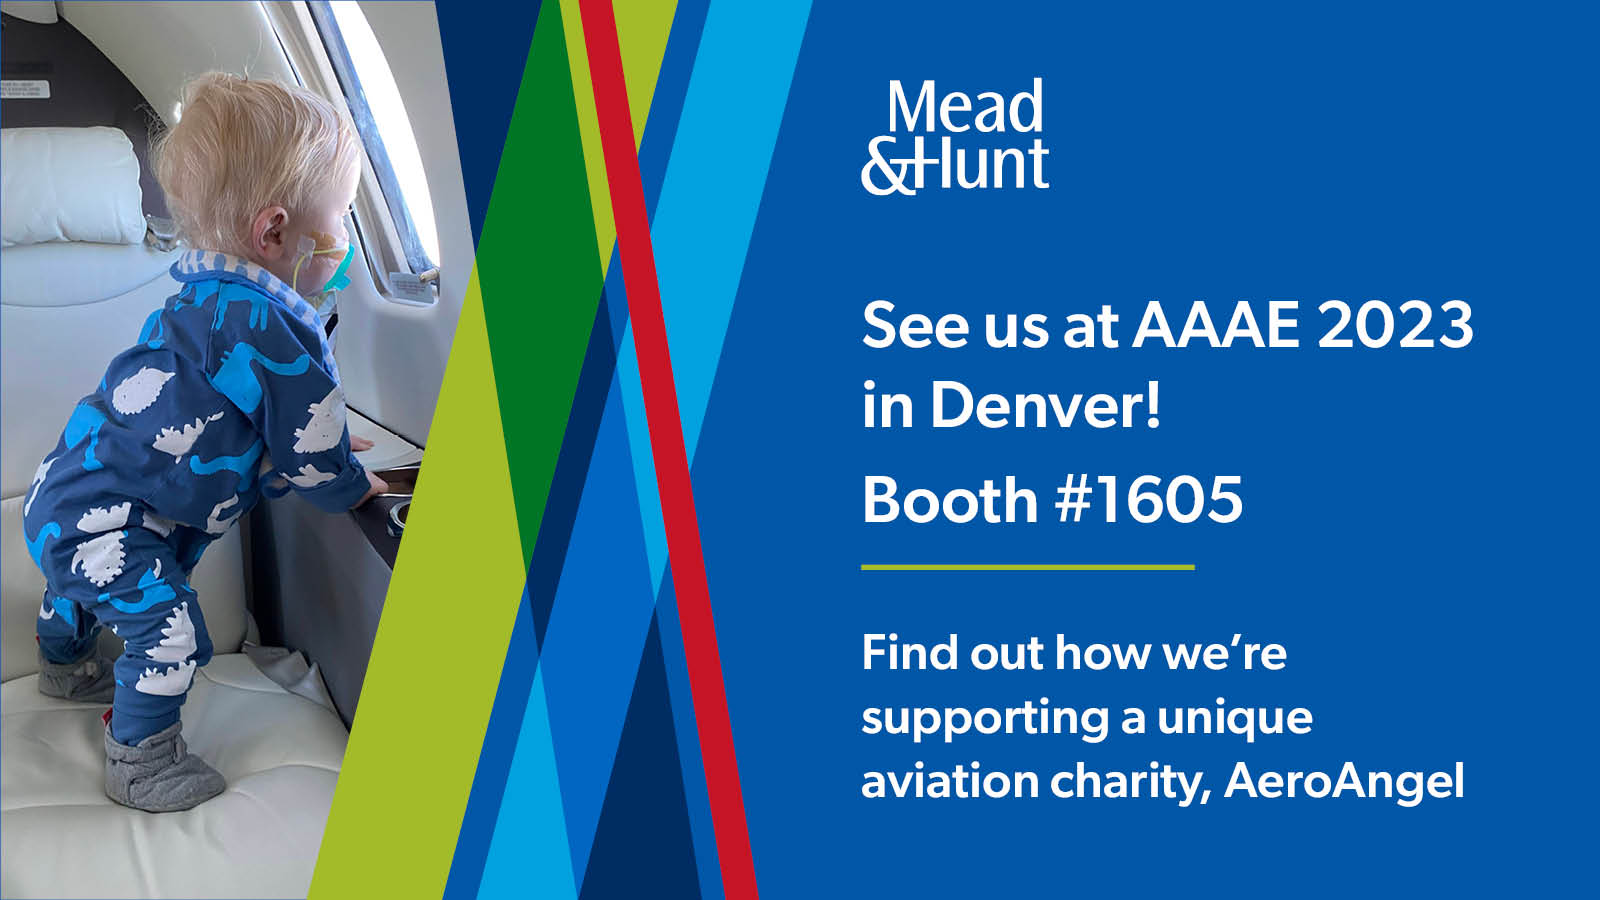 A baby with medical tubes peers out of a plane window. Text says: See us at AAAE 2023 in Denver, Booth #1605. Find out how we're supporting a unique aviation charity, AeroAngel